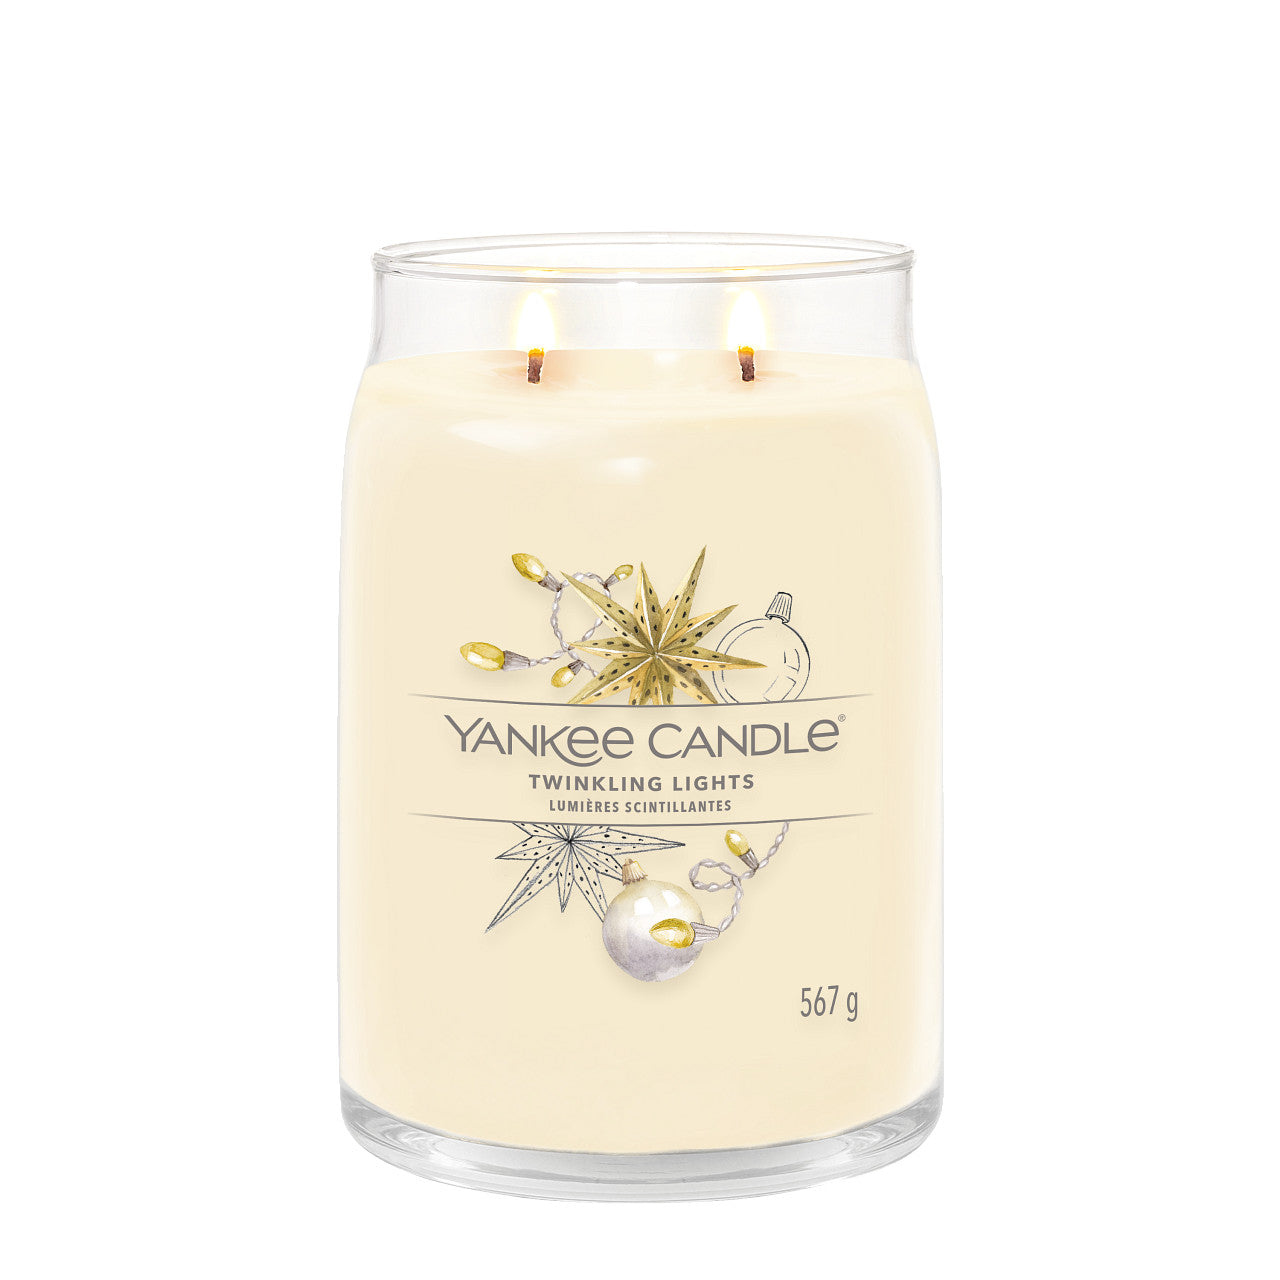 Twinkling Lights - Signature Large Jar Scented Candle